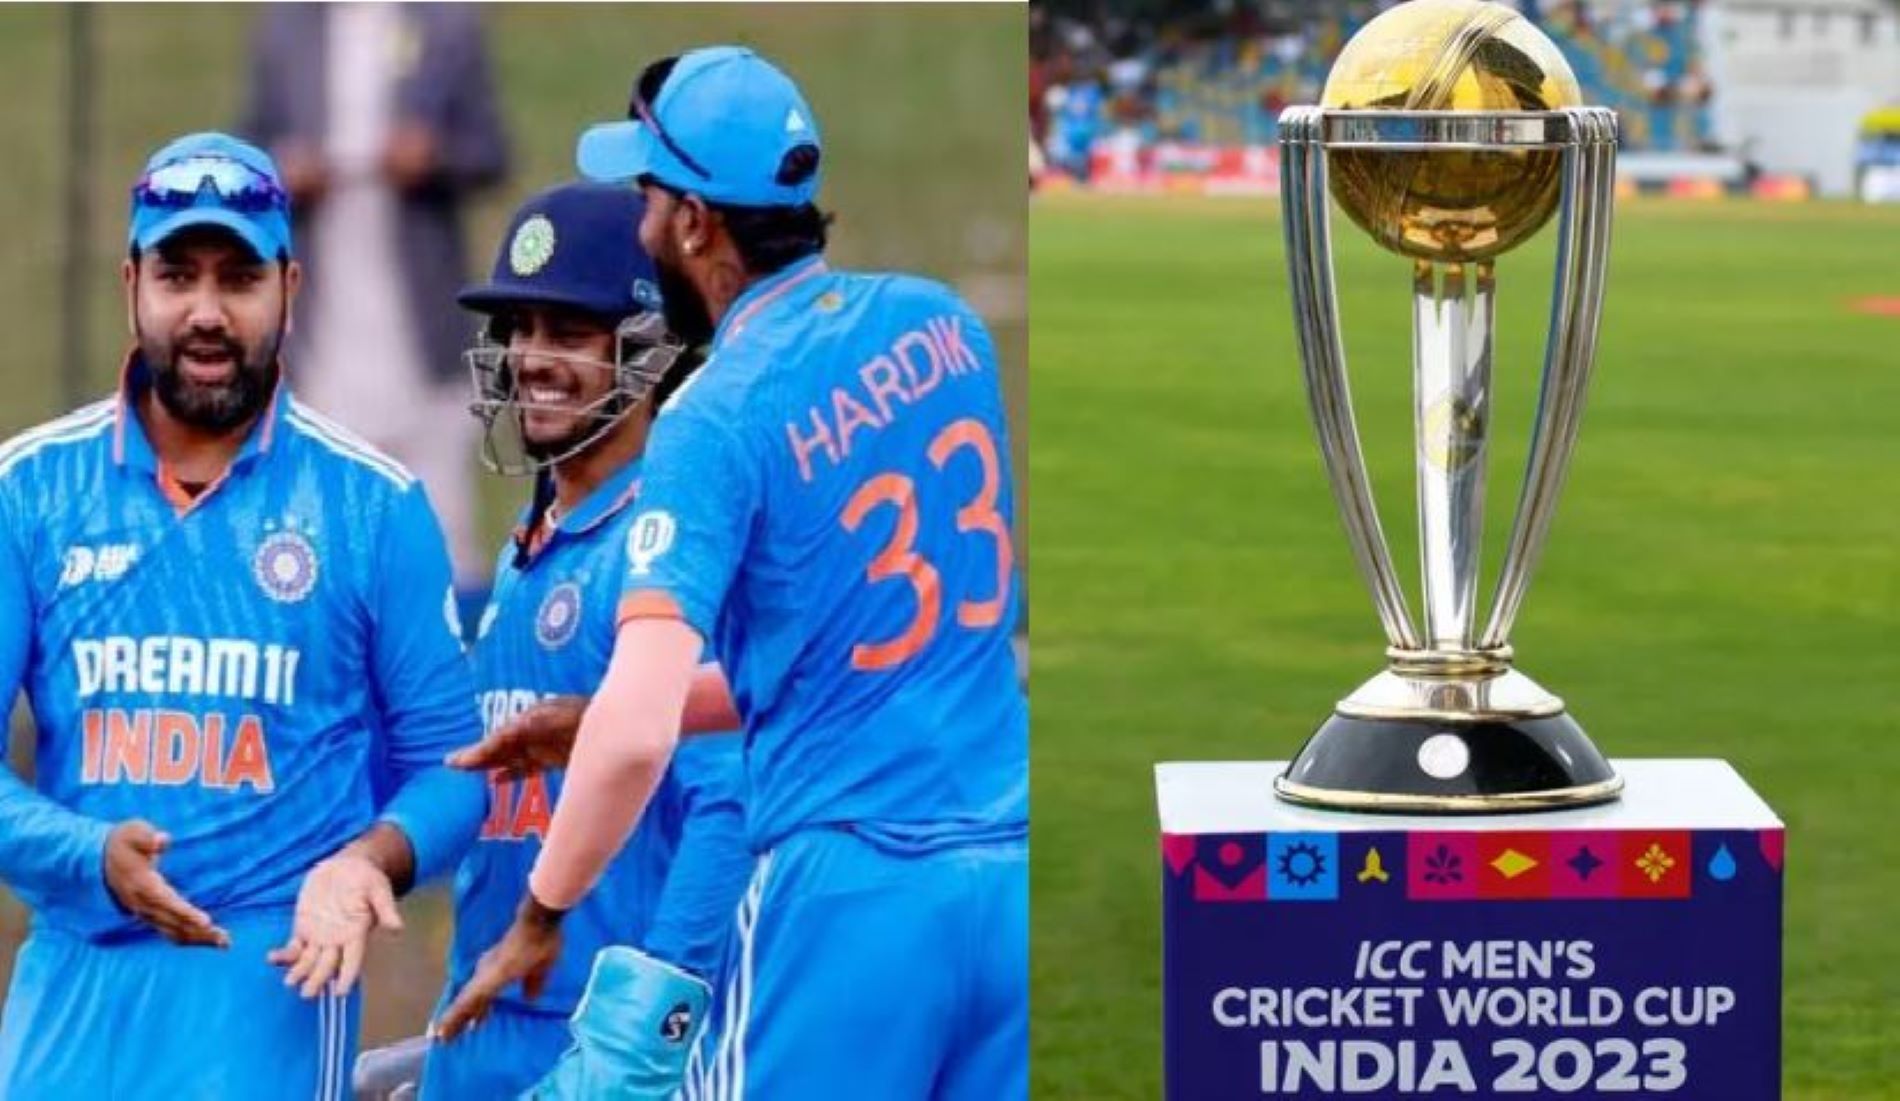 The Men in Blue will play their first home ODI World Cup since 2011